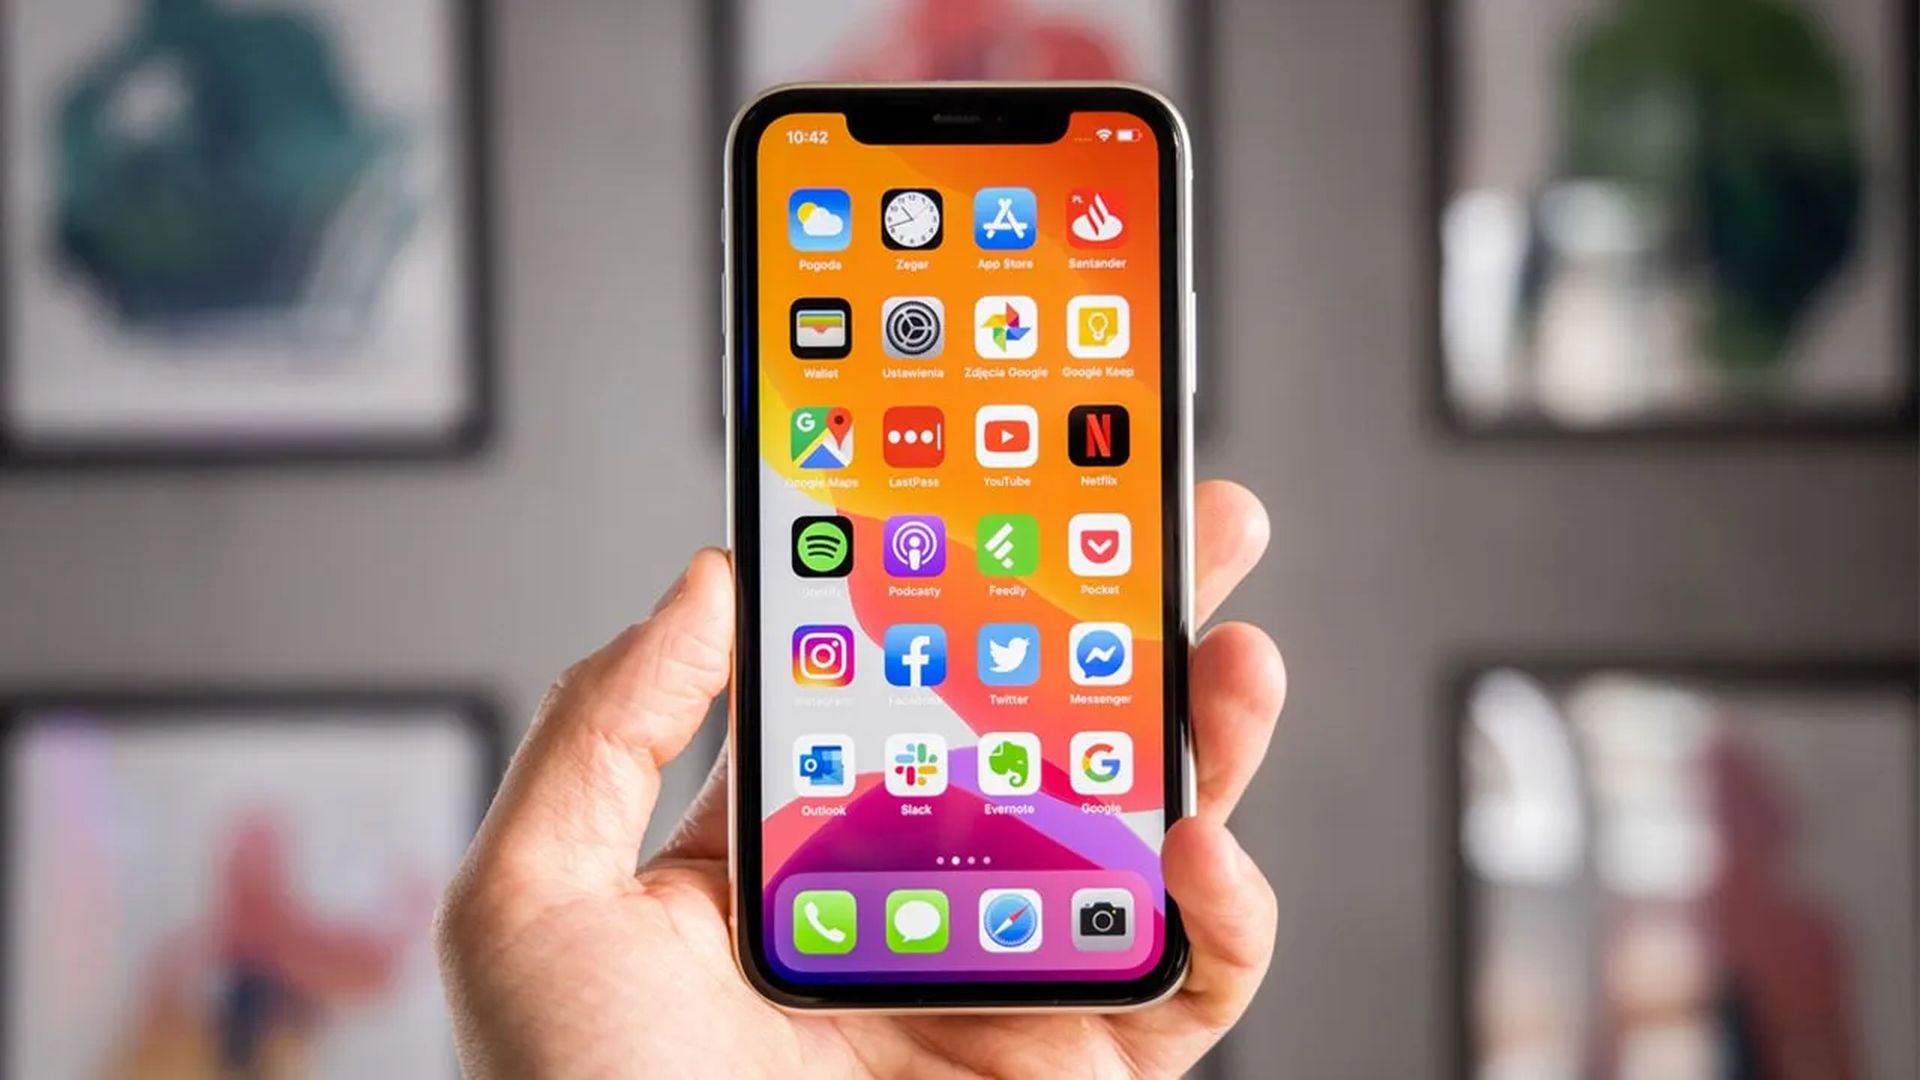 The sixth major update to the iOS and iPadOS 15 operating systems, iOS 15.6 and iPadOS 15.6 is out. Let's review the new features, compatible devices and more.